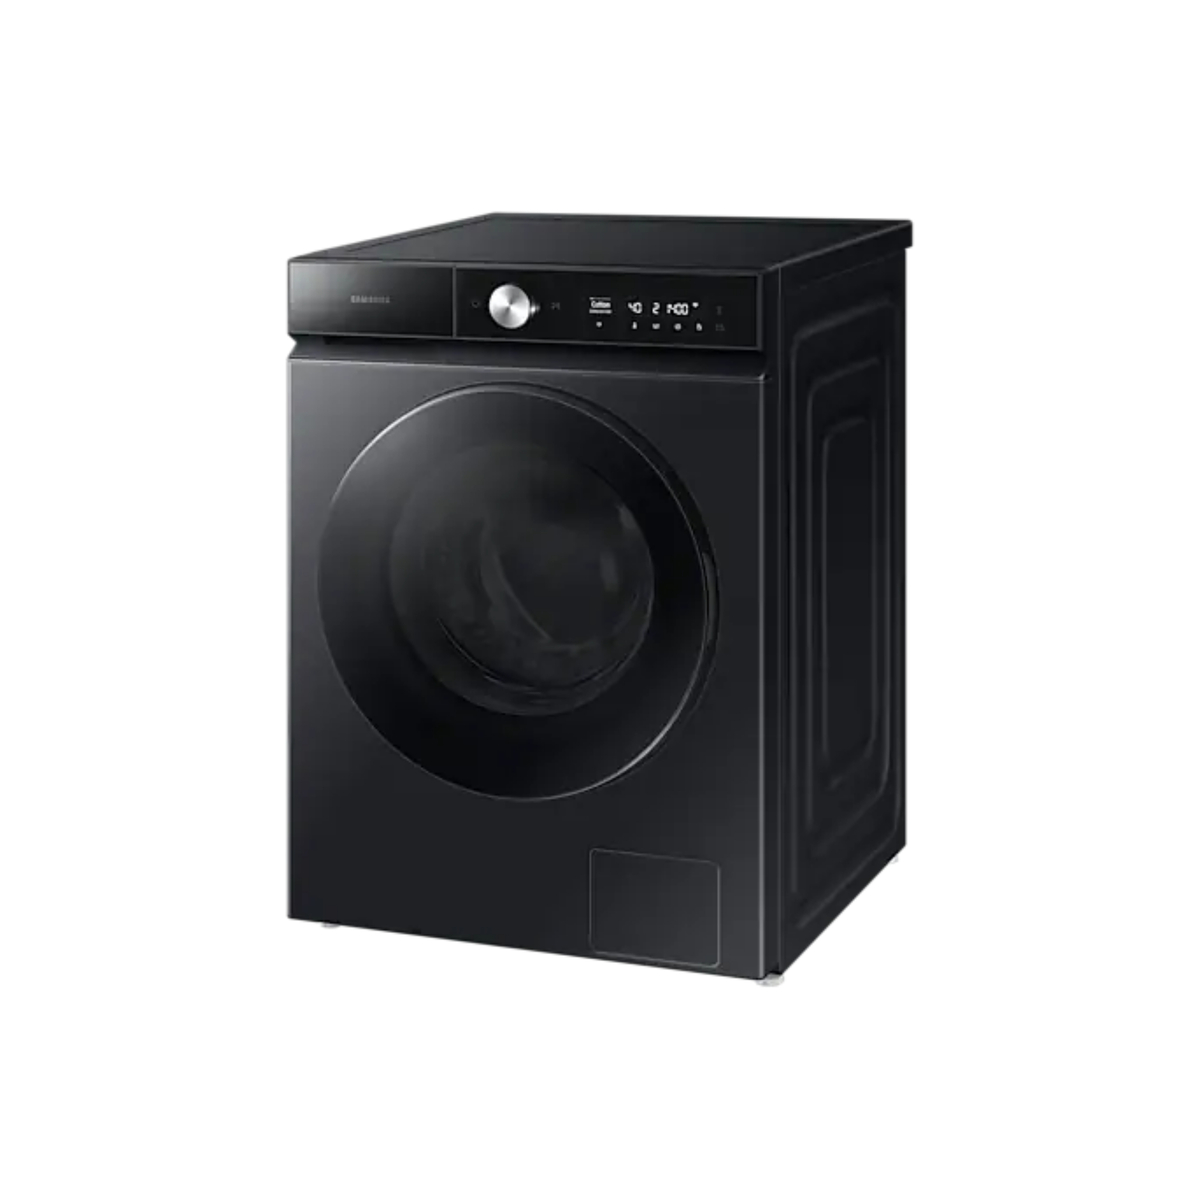 Samsung Washer Dryer Combo with AI Ecobubble and AI Wash, 11/8 Kg, 1400 RPM, Black, WD11BB944DGBGU